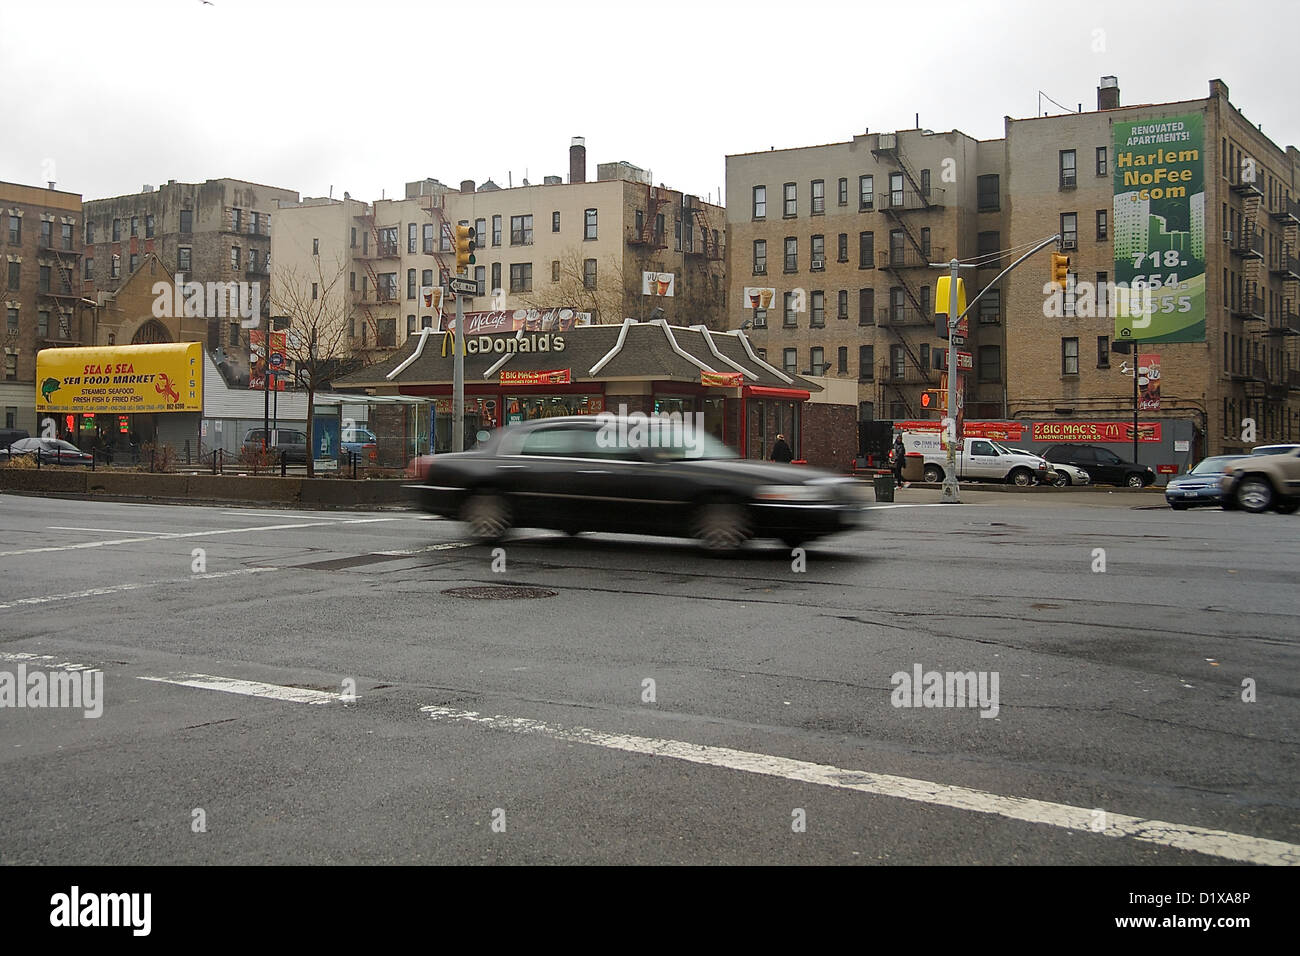 A car driving through an intersection in Harlem, New York City Stock Photo